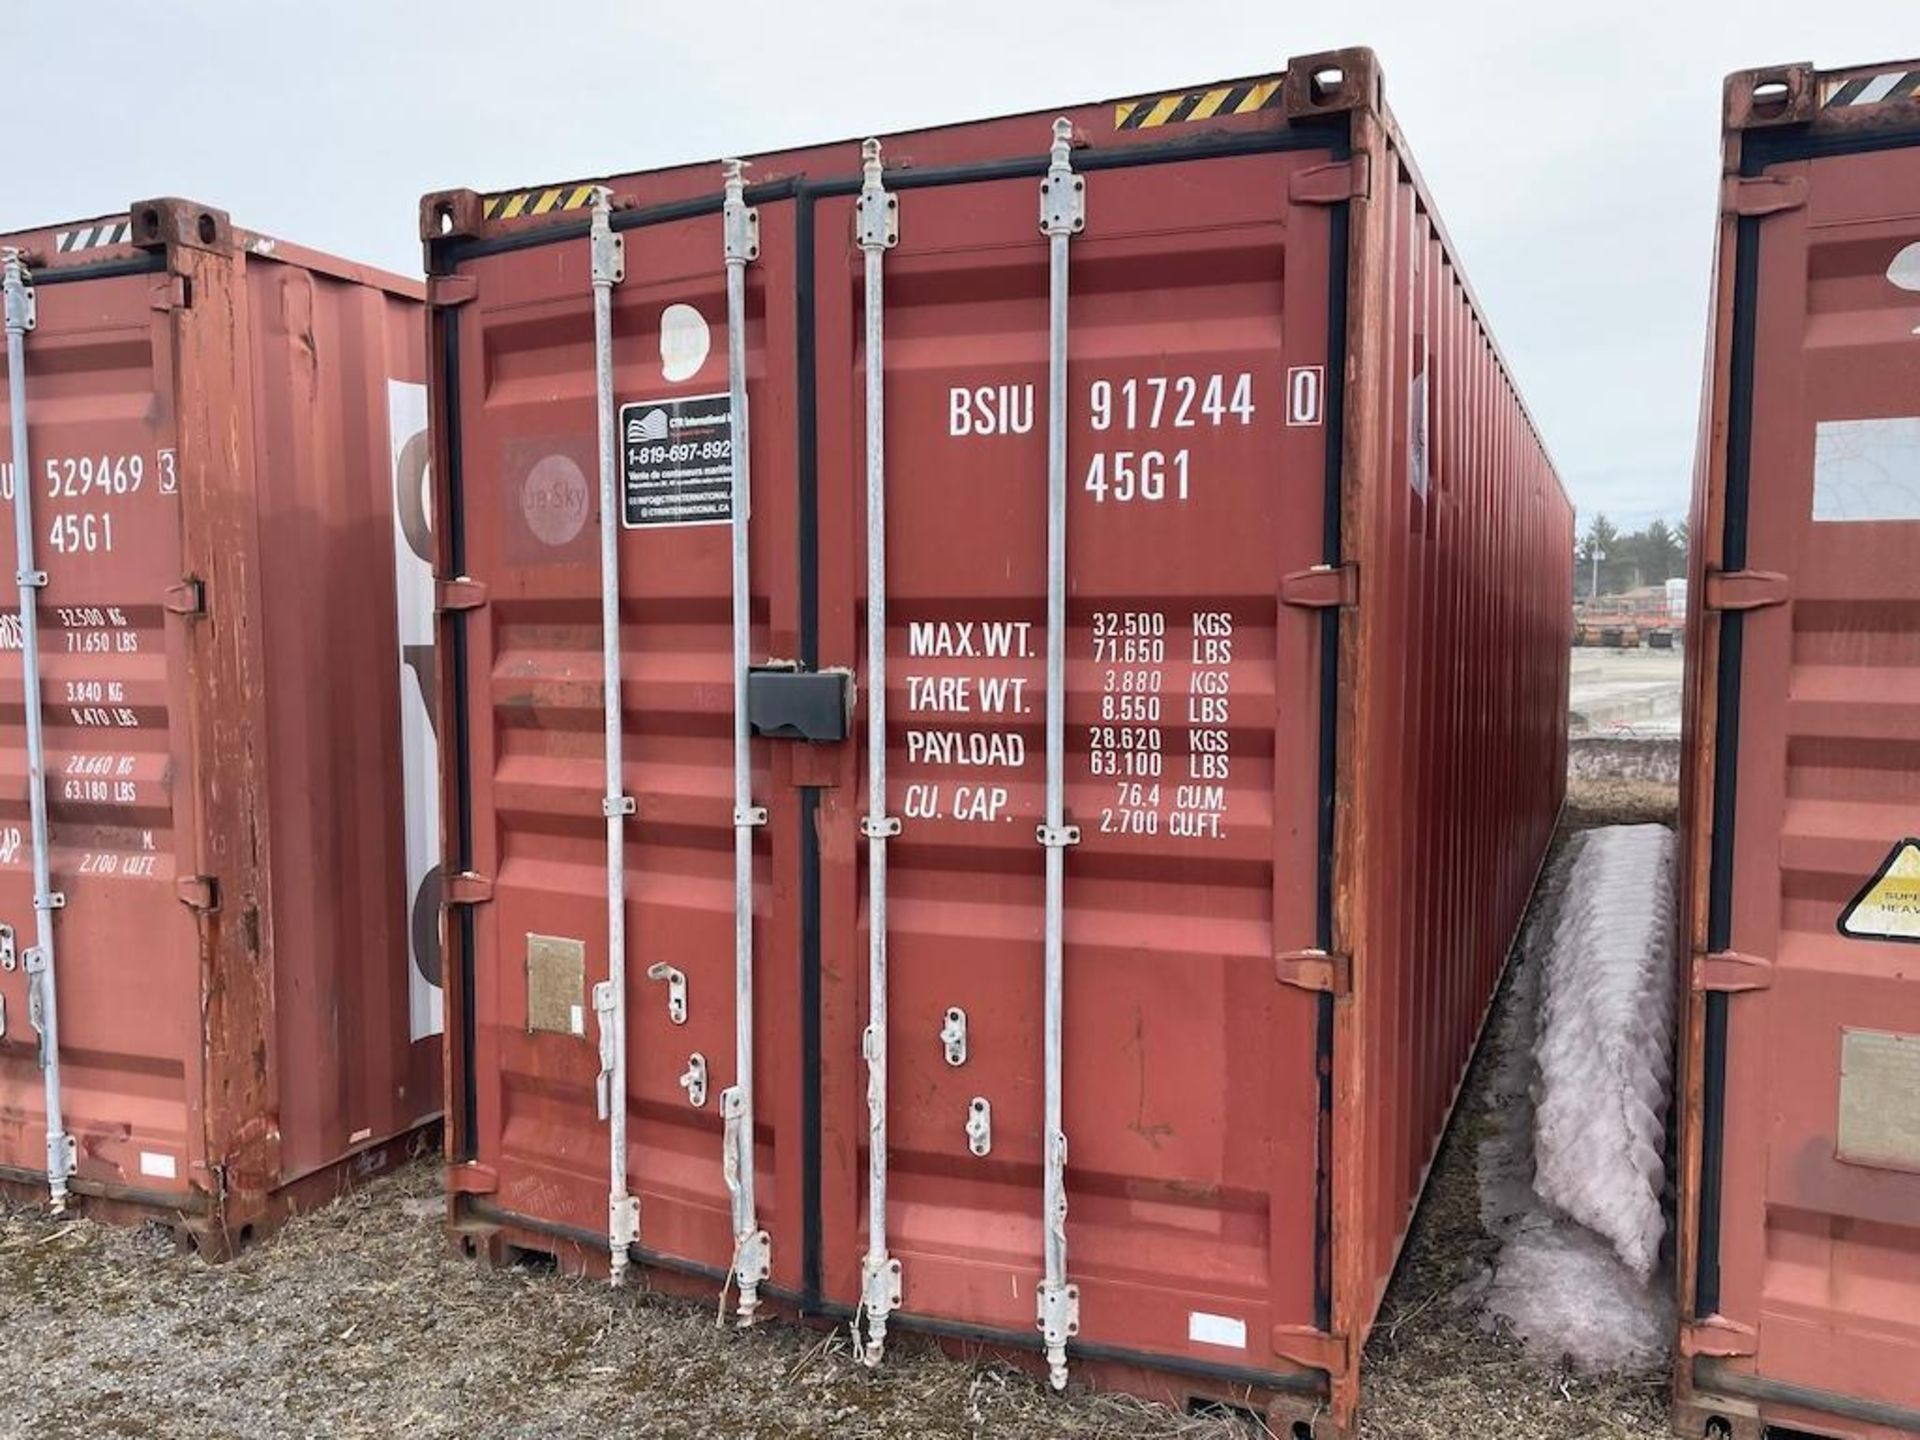 40 FT SEA CONTAINER, EXCLUDING CONTENTS, DELAYED PICK UP UNTIL MAY 13 [10] [TROIS RIVIERES] *PLEASE - Image 2 of 4